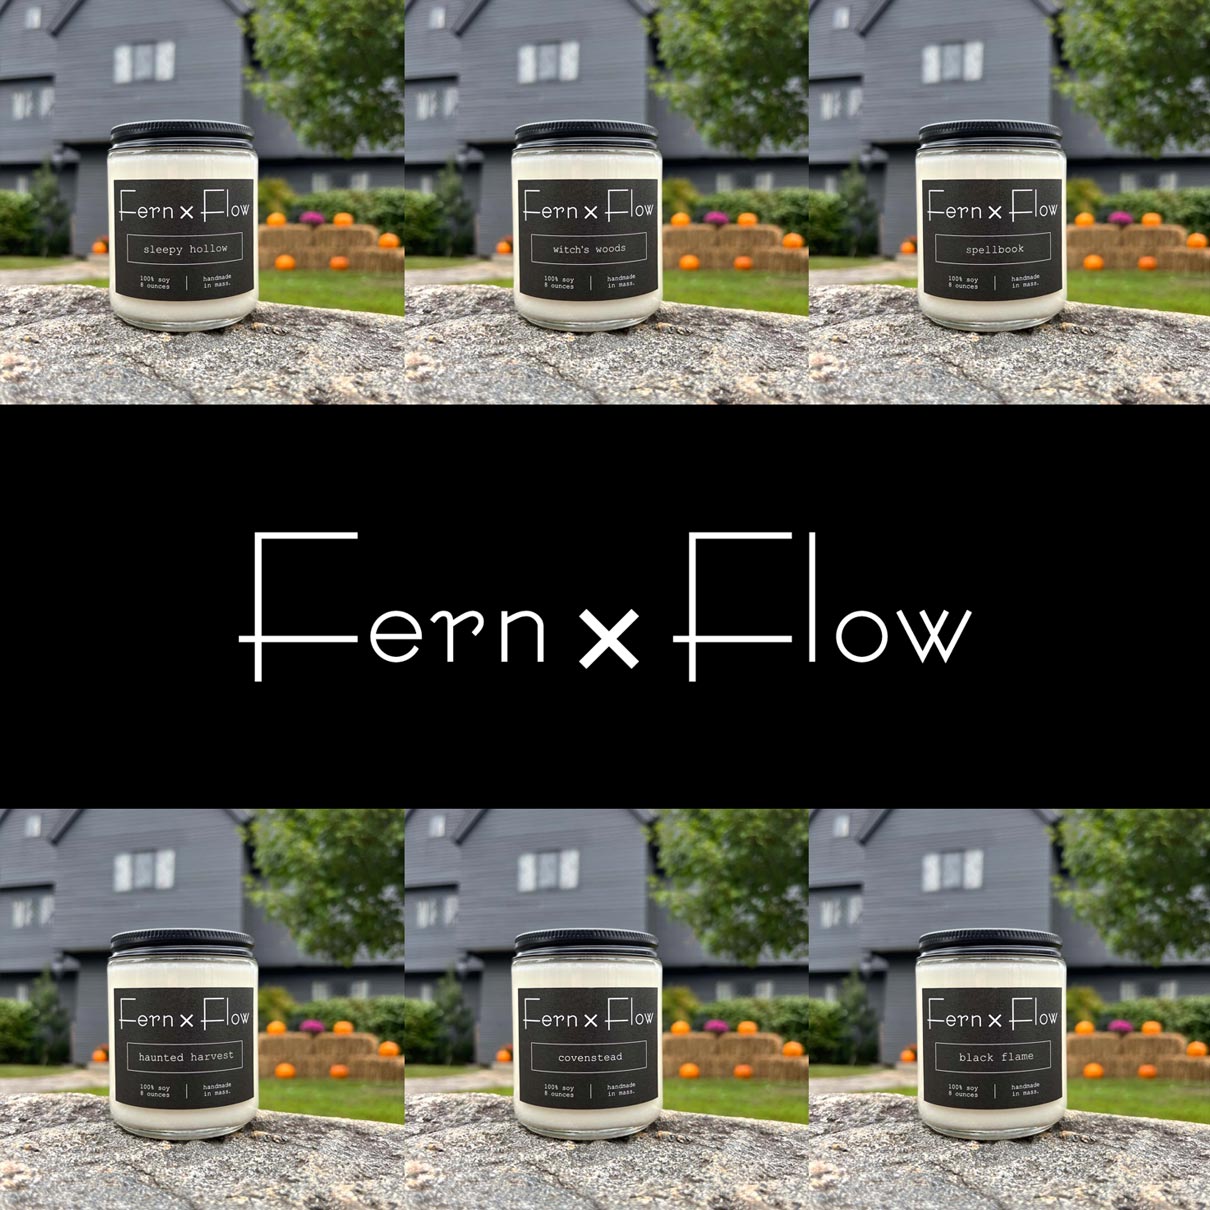 Fern x Flow Halloween Candle Collection, featuring six Halloween-inspired vegan, soy candles all in front of the Salem Witch House in Salem, Massachusetts